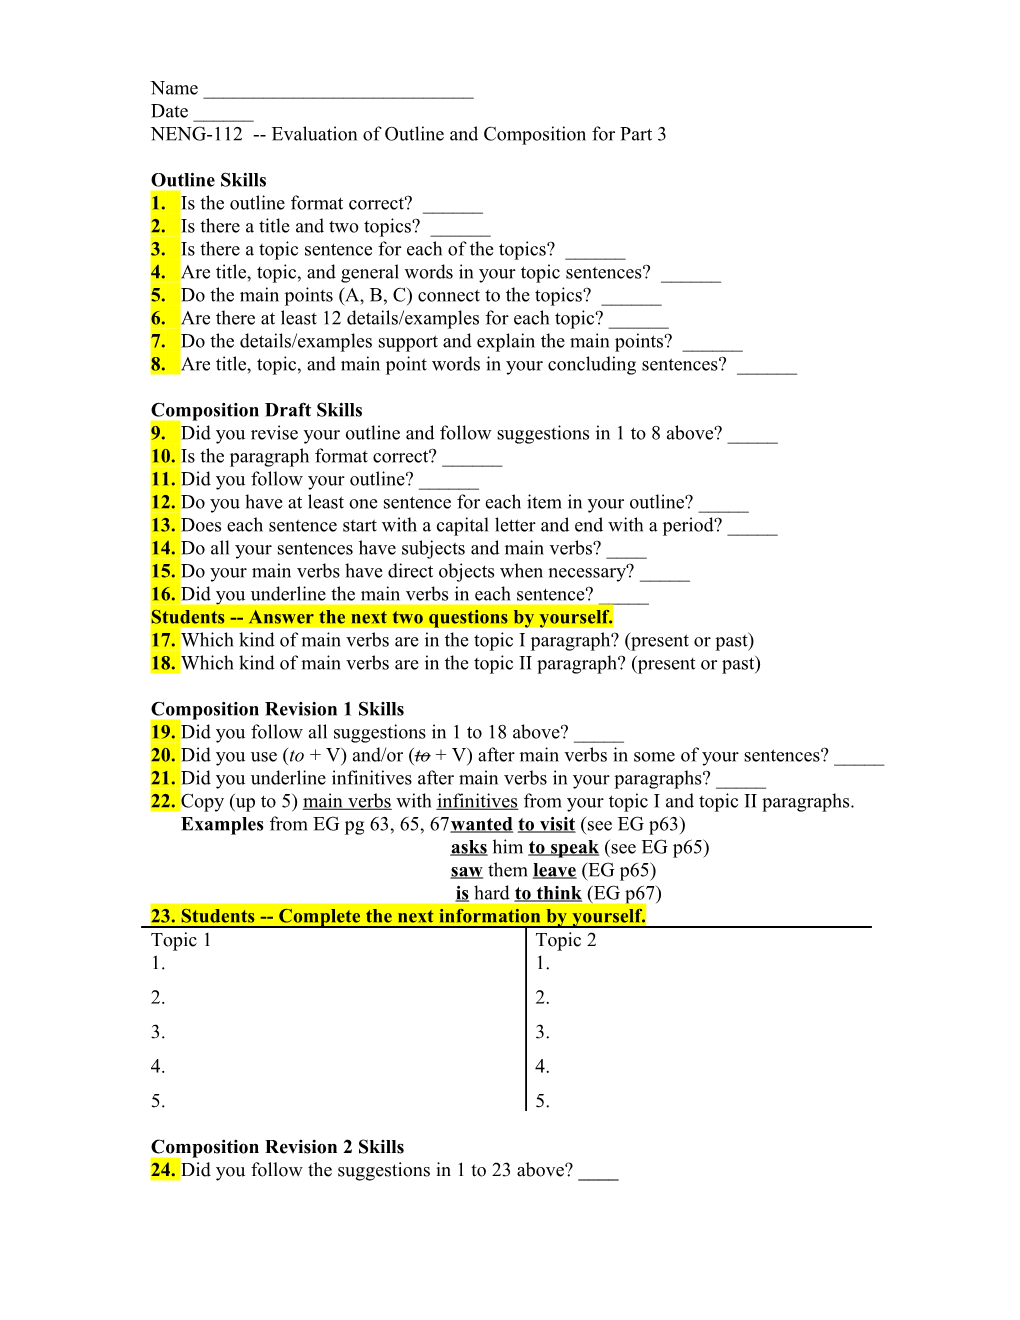 Evaluation of Outline and Paragraphs